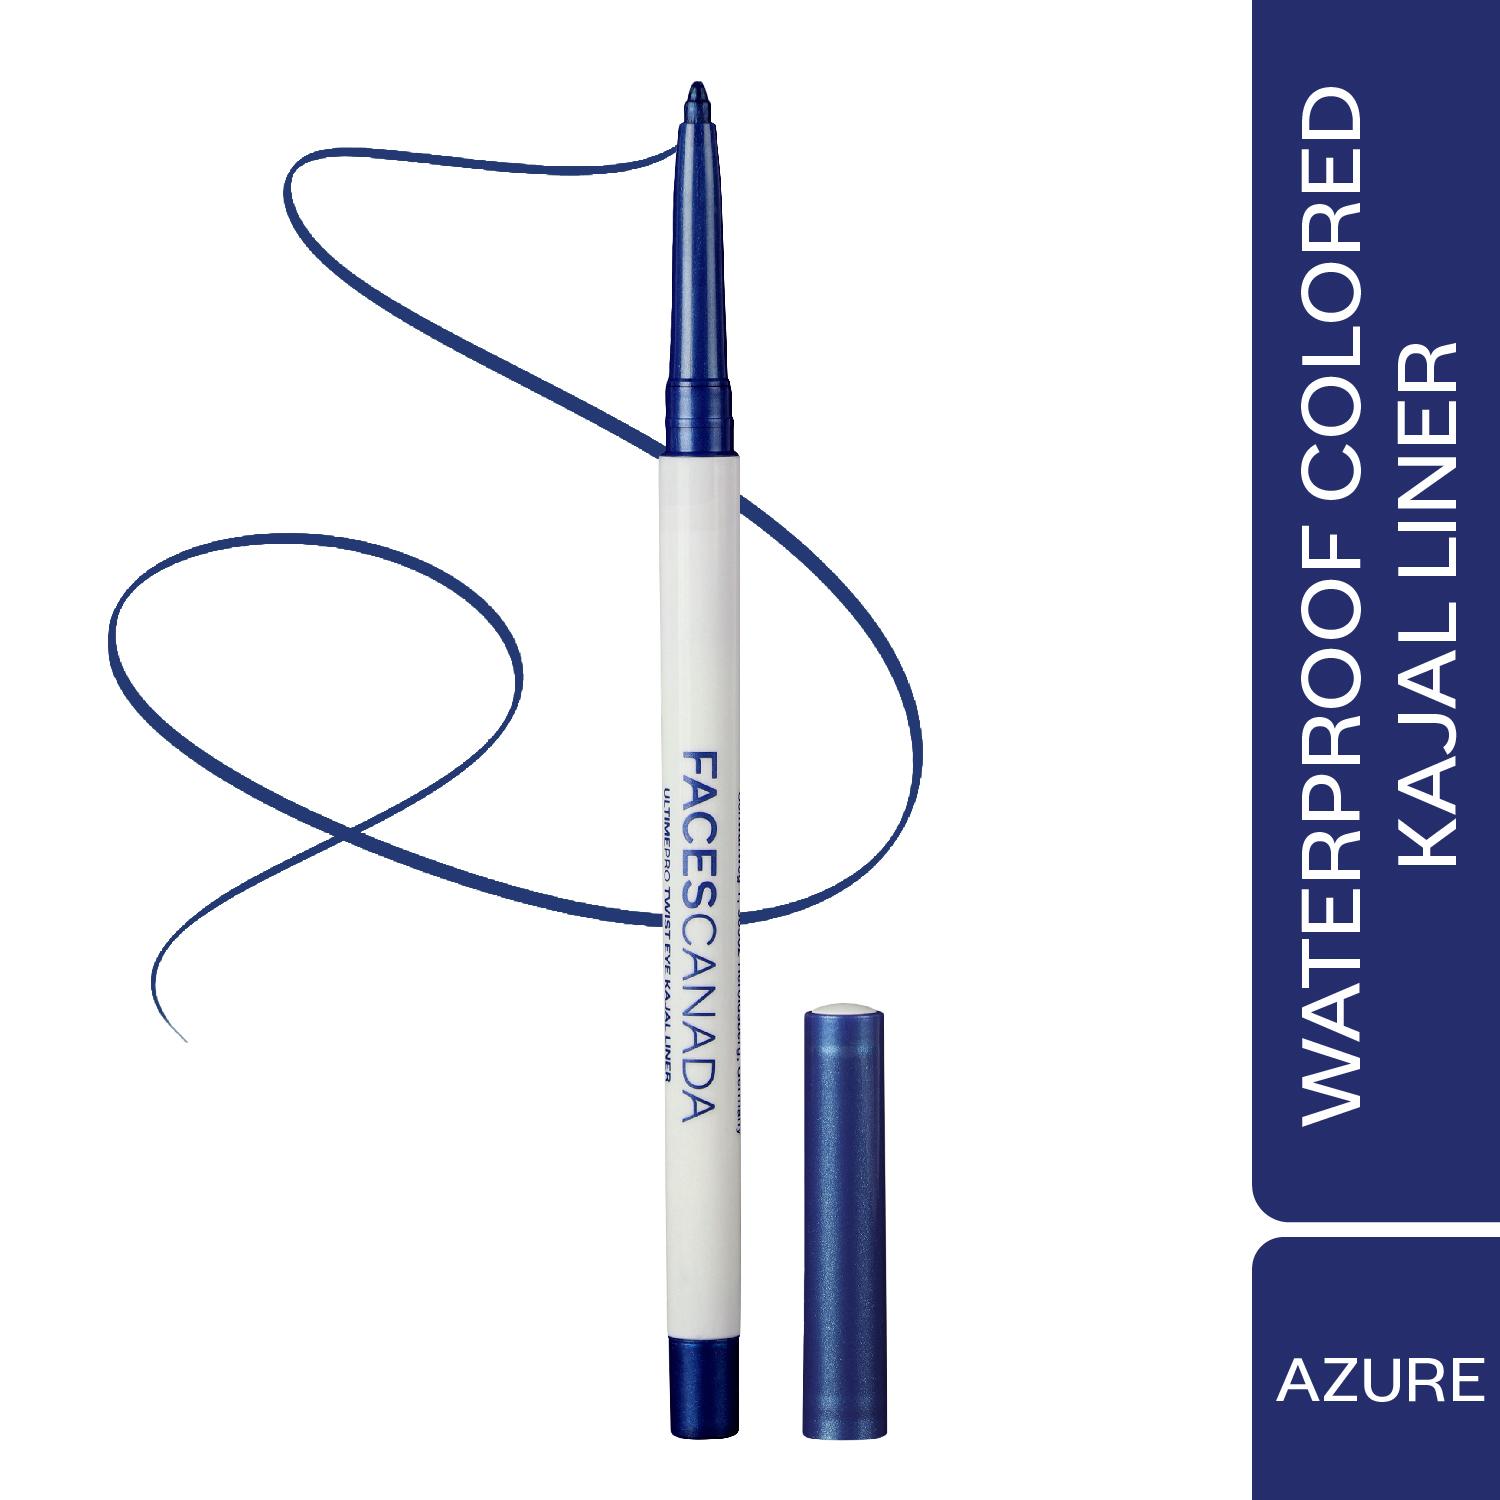 Faces Canada | Faces Canada Ultime Pro Twist Eye Kajal Liner - Azure, Intense Color, 24HR Stay, Waterproof (0.35 g)